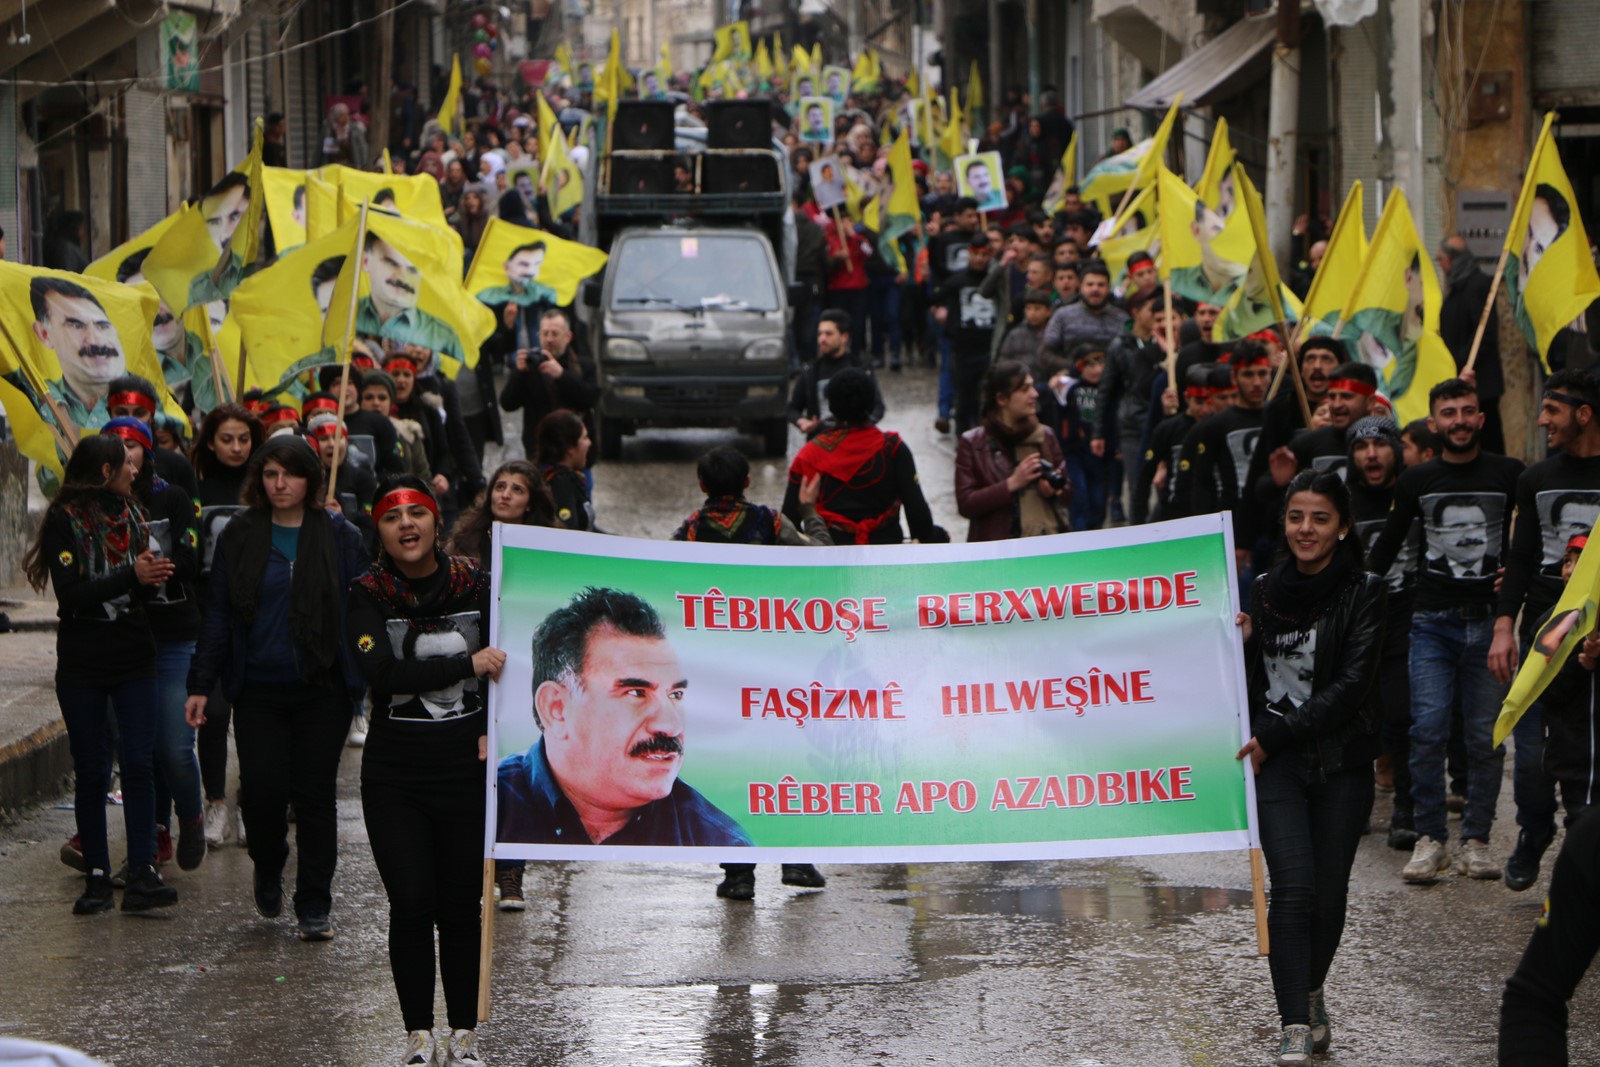 Aleppo youths demonstrated denouncing international conspiracy on Ocalan